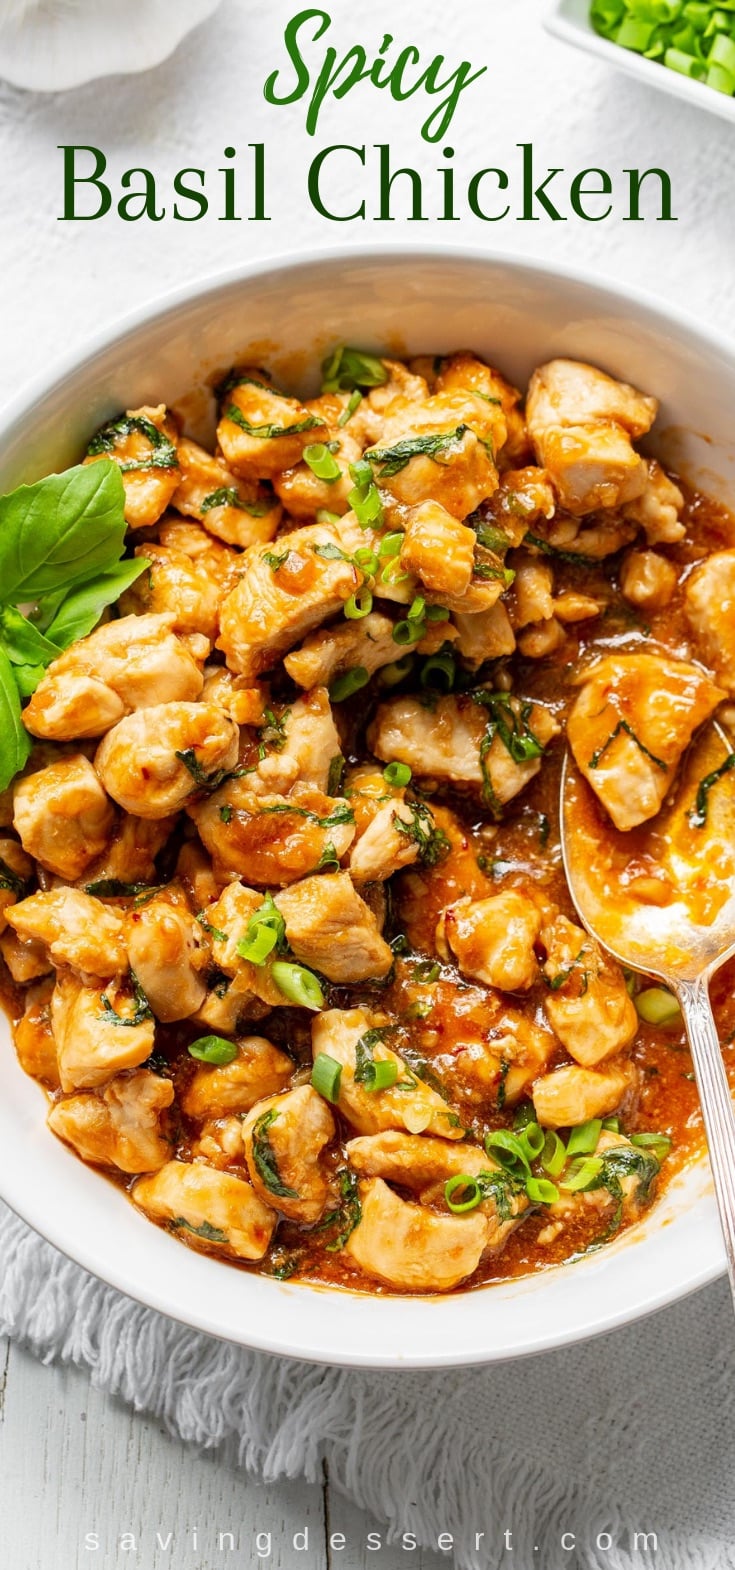 A bowl of spicy basil chicken garnished with sliced green onions